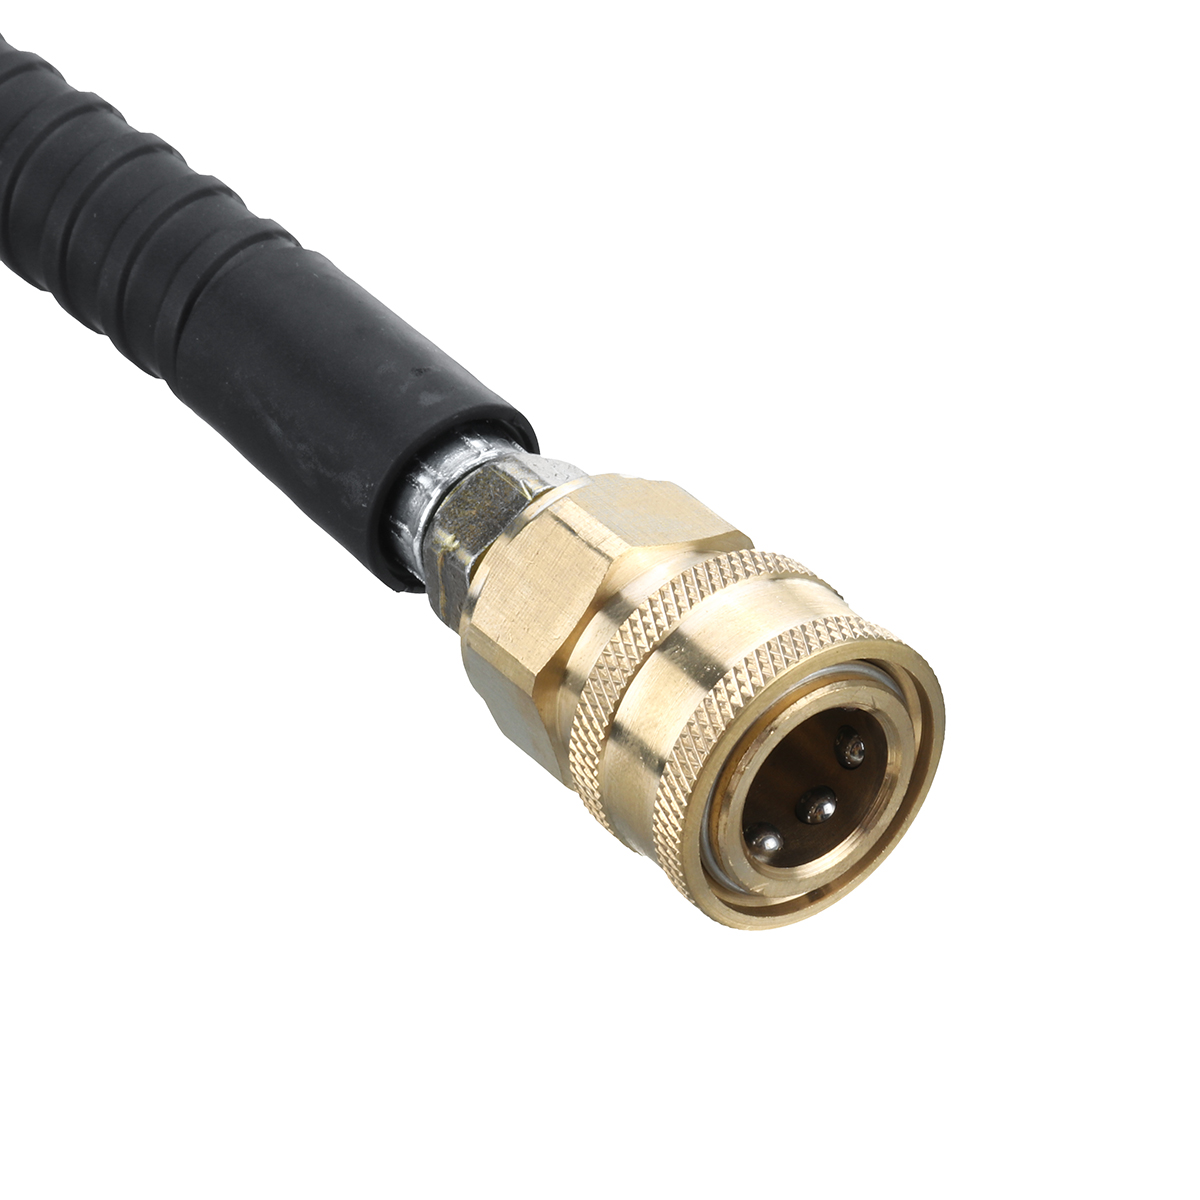 5M-5800PSI-High-Pressure-Washer-Hose-Pipe-Drain-Sewer-Cleaning-Hose-for-Car-Garden-Water-Washer-1558770-6